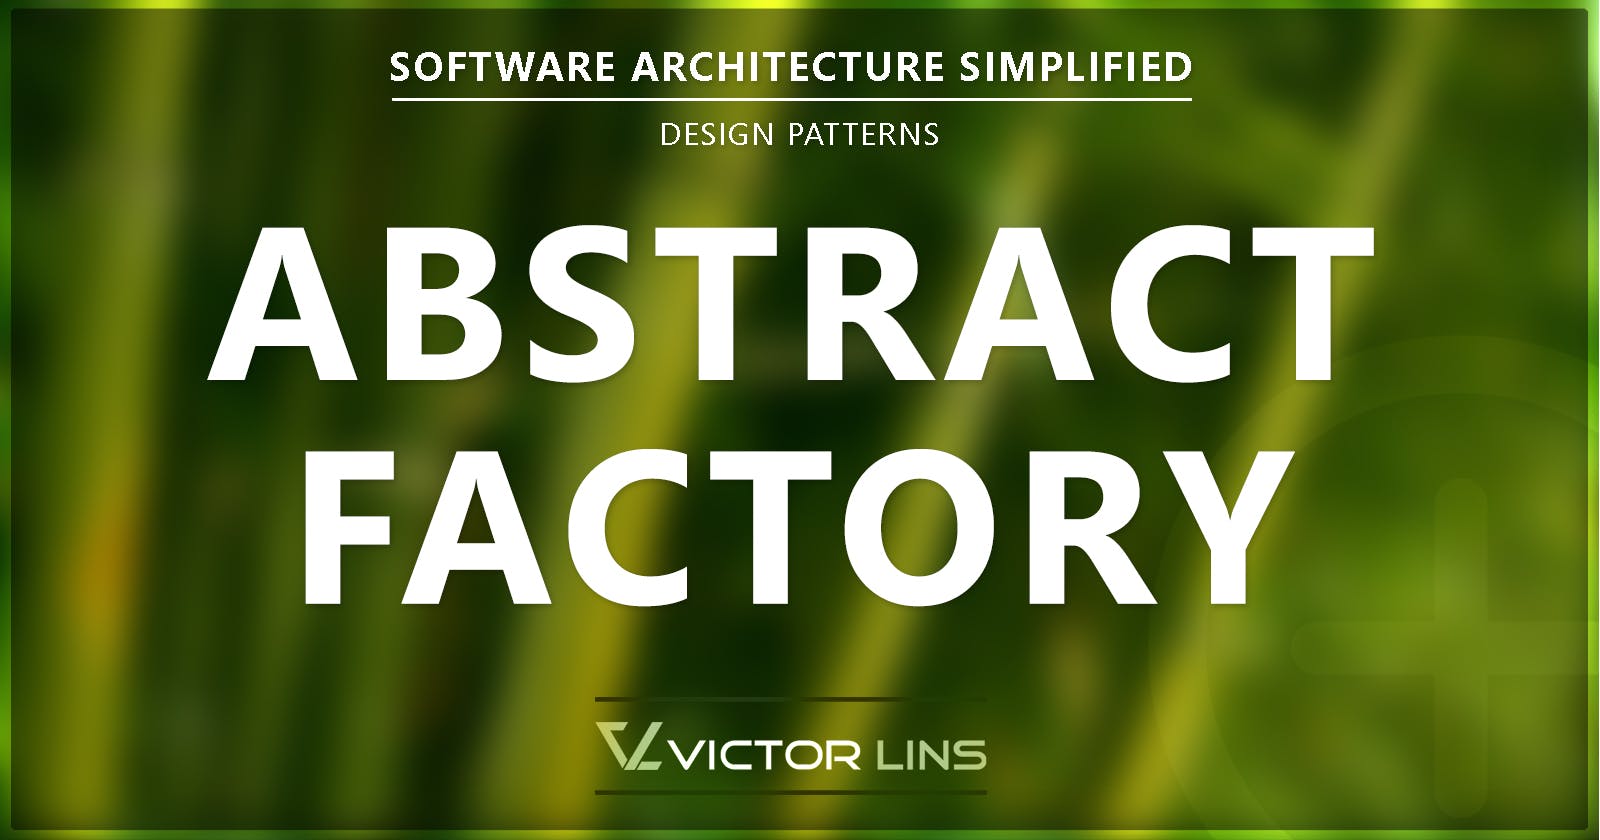 Abstract Factory - Design Pattern